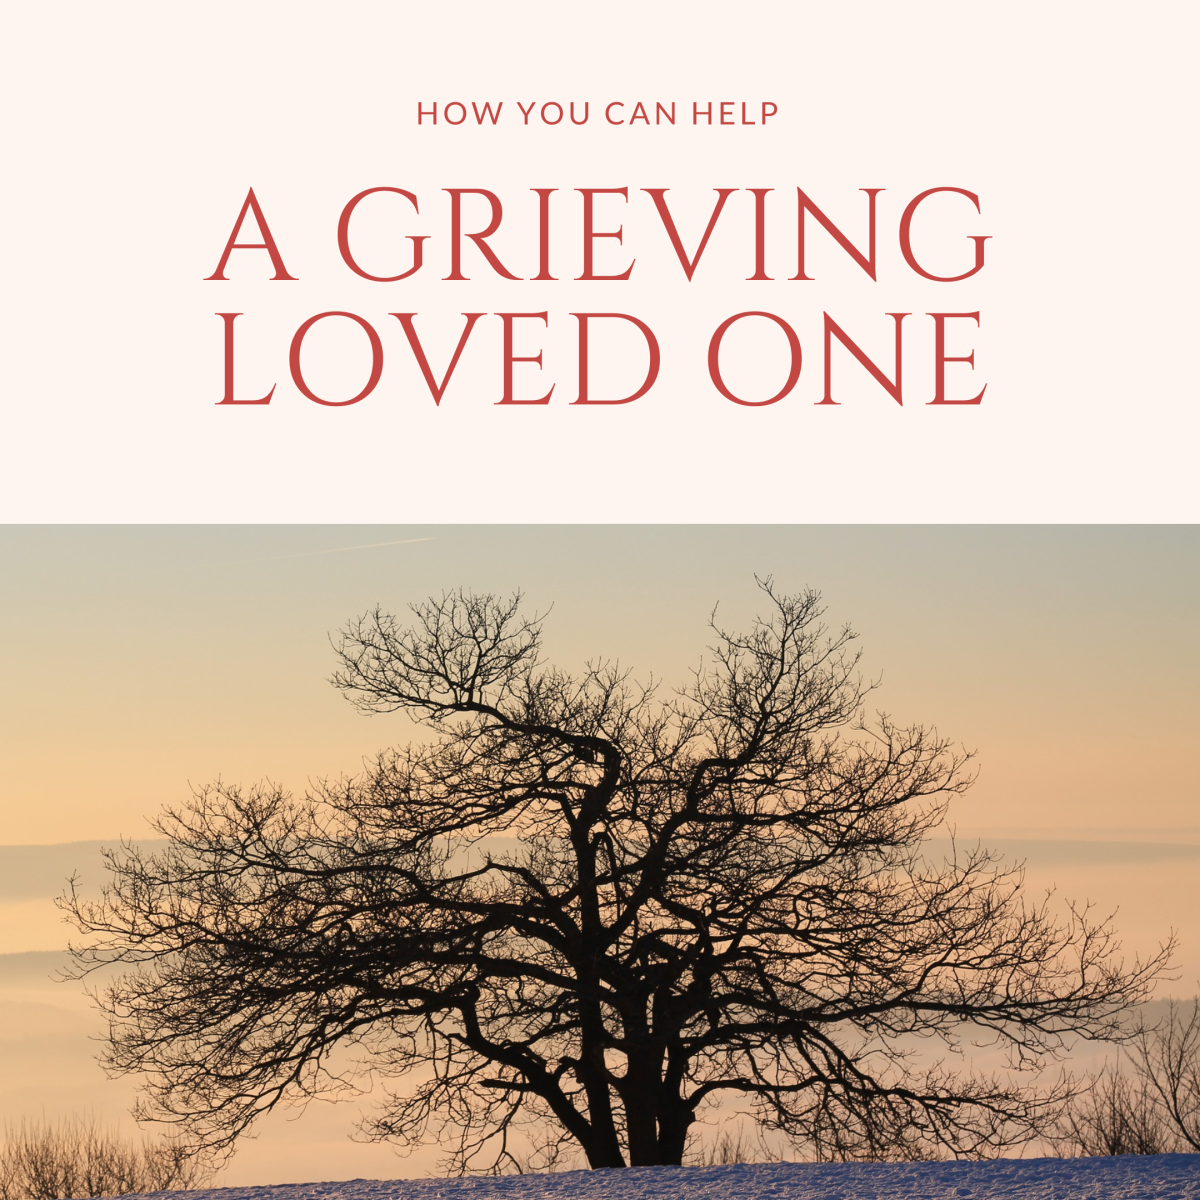 Losing a loved one is difficult. It takes awhile to get used to the new normal.  Here are some ways you can help a grieving friend or family member, based on my own experience of losing my husband.